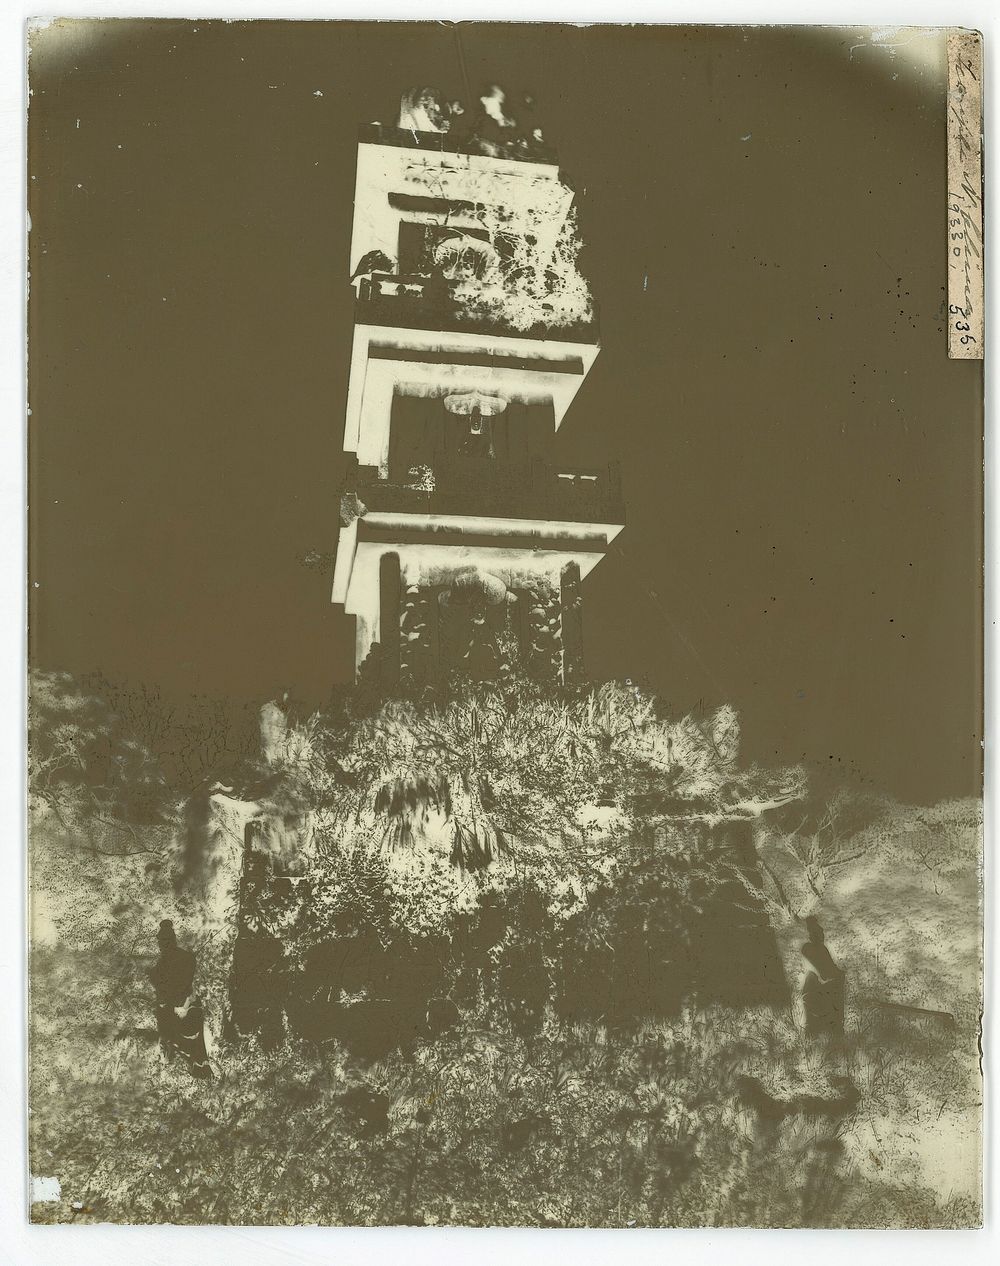 Ruins of a marble tower, Beijing, China. Photograph by John Thomson, 1871.